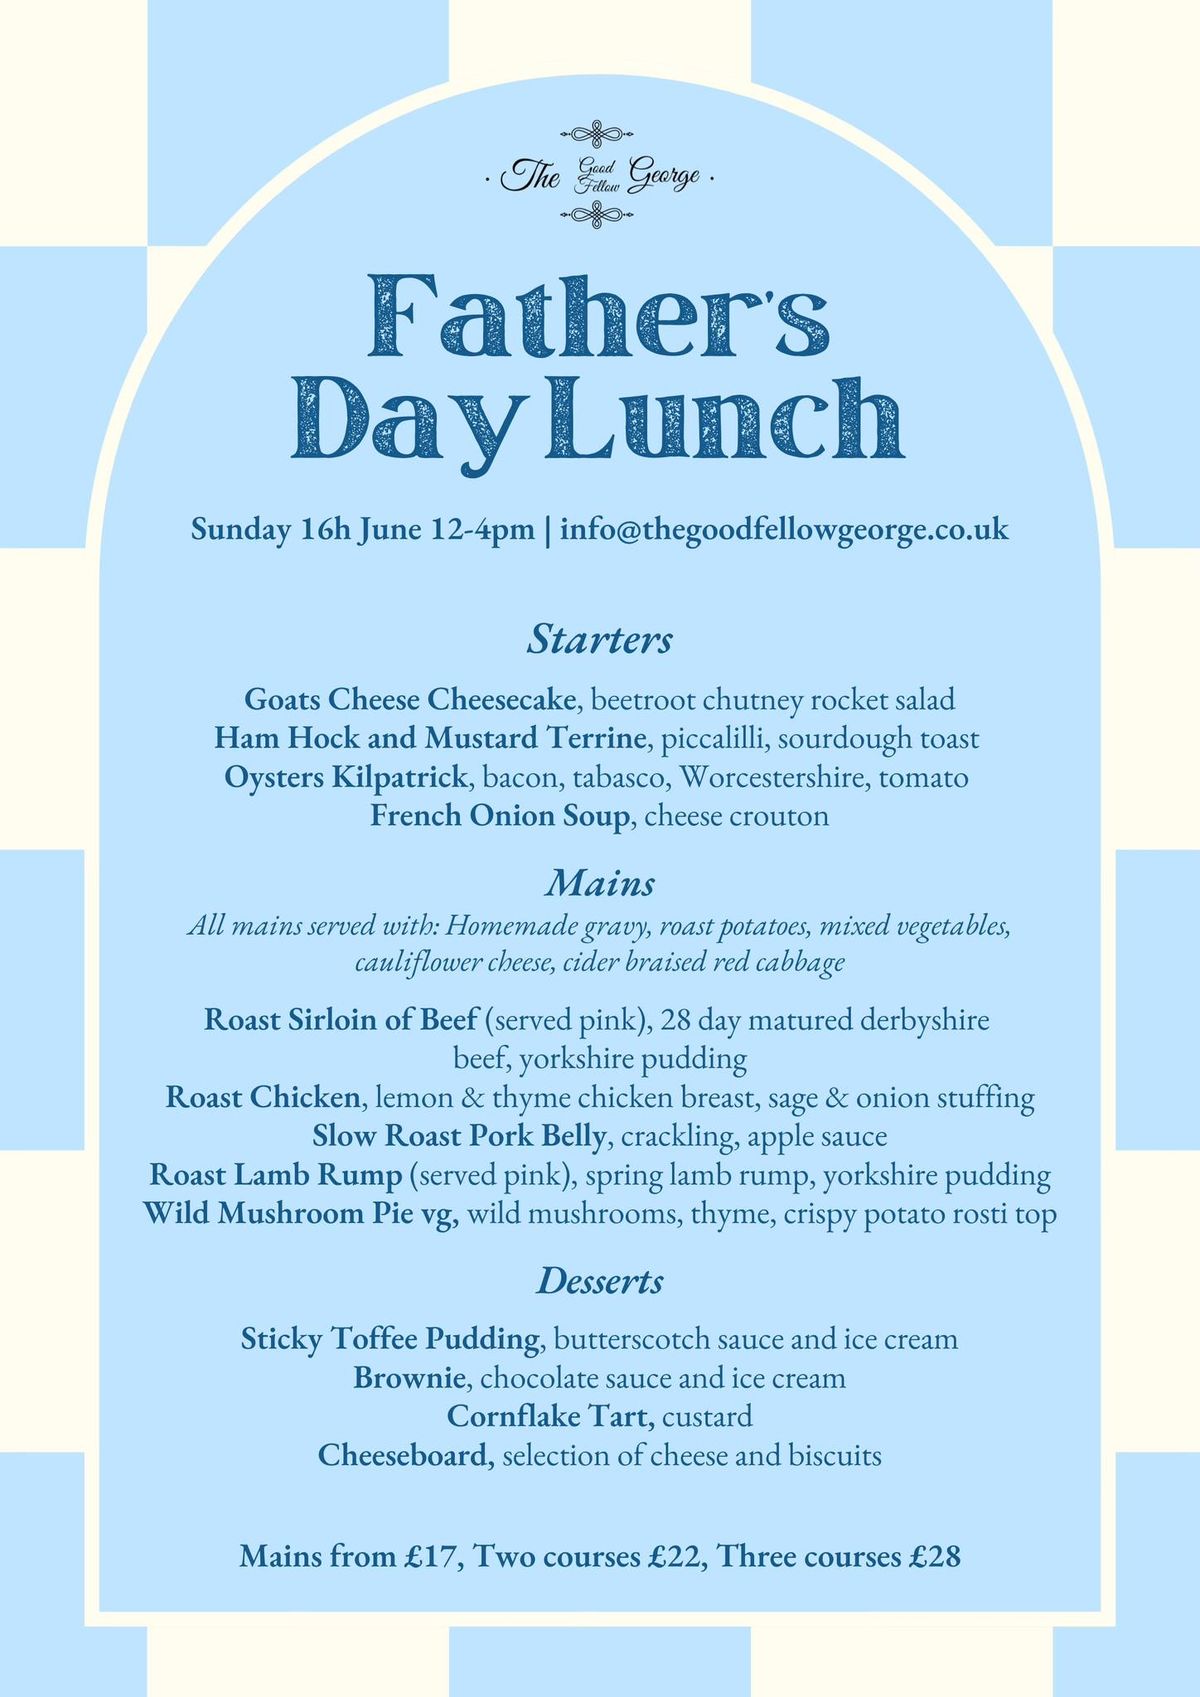 Father's Day Sunday Lunch